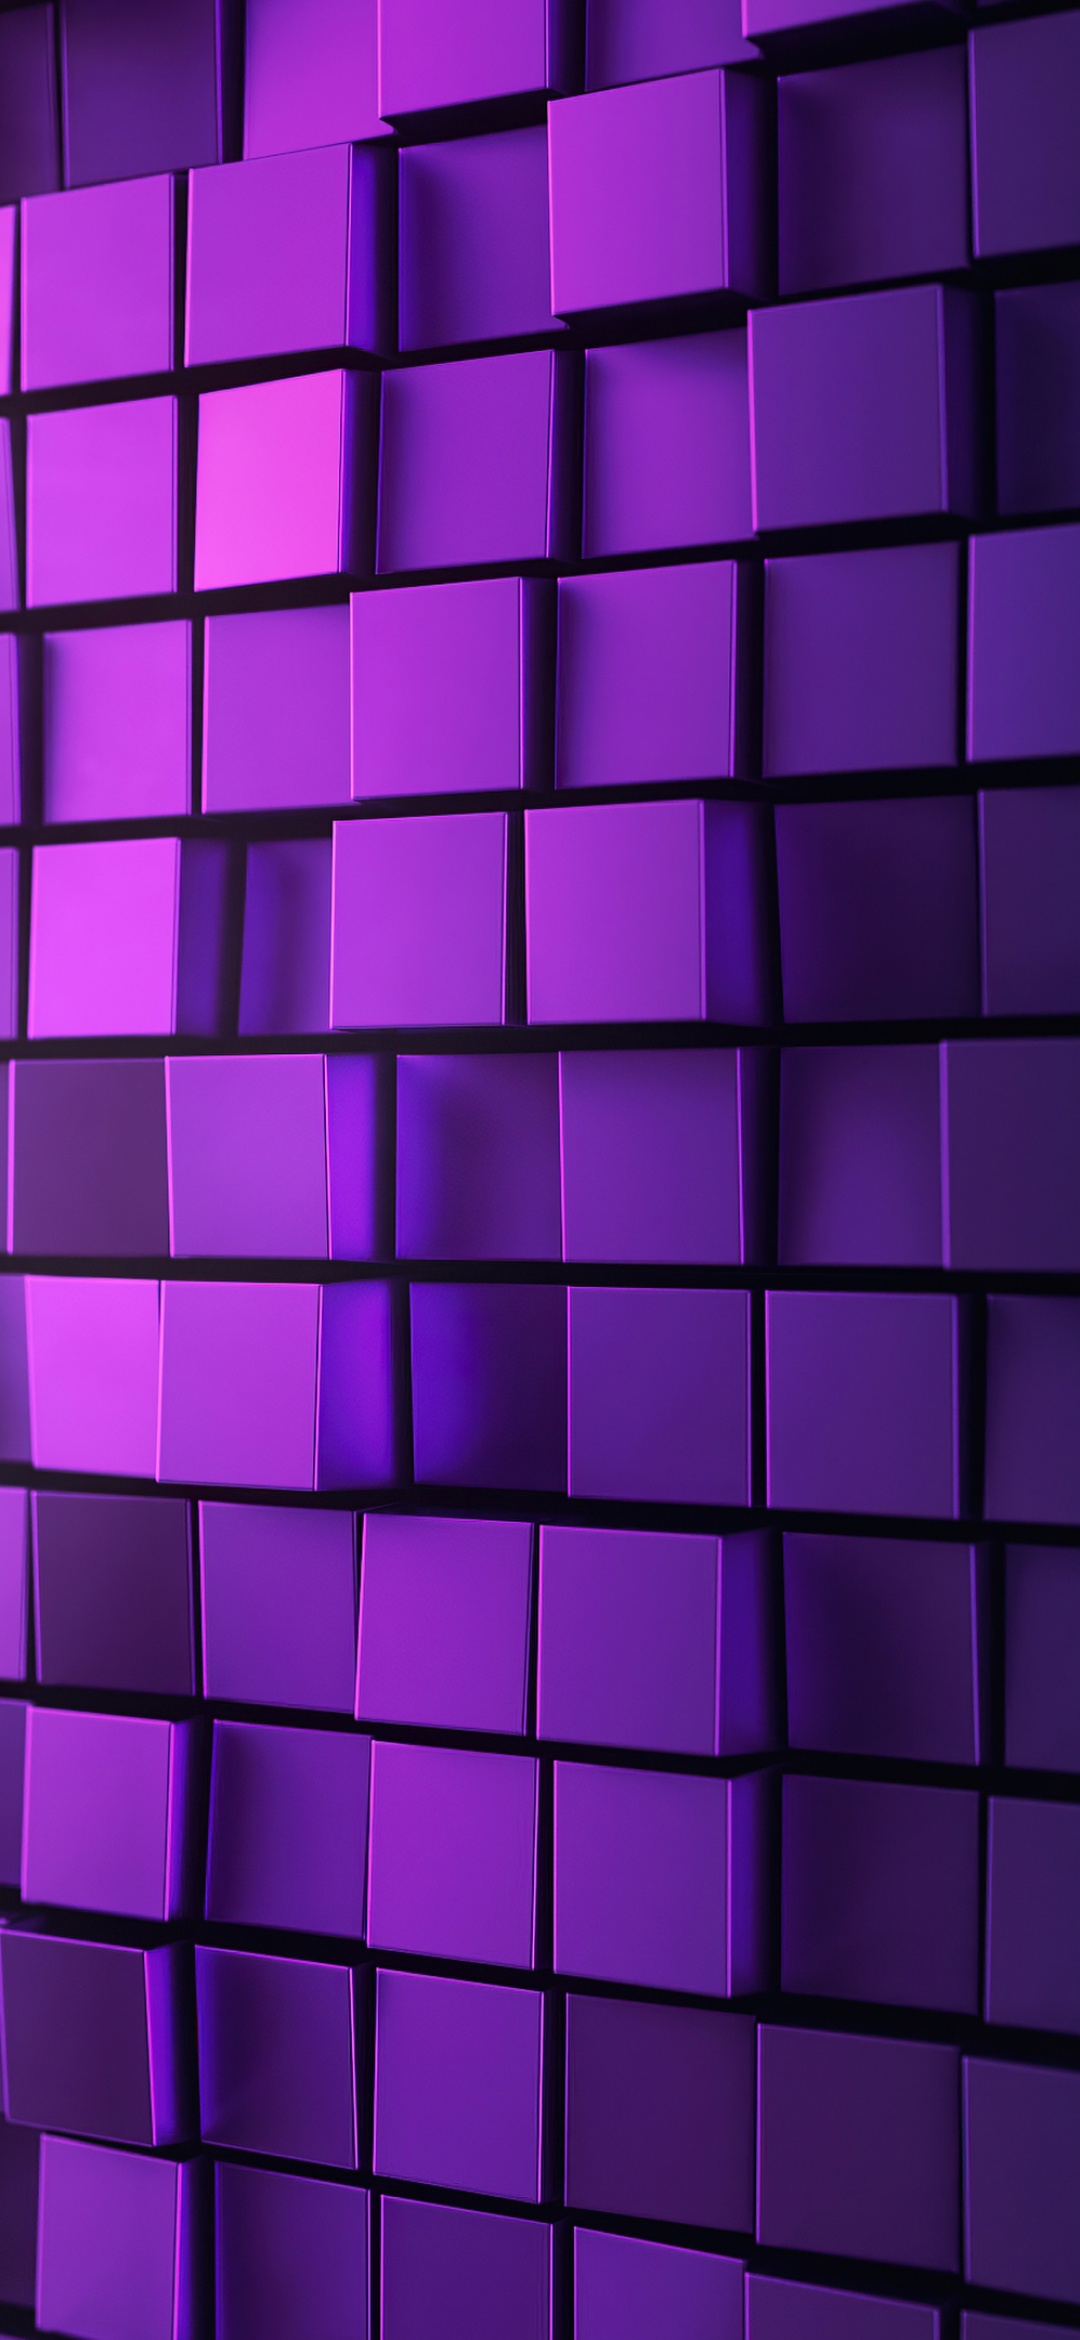 3d Background Wallpaper 4k Squares Purple Light Metal Aesthetic Abstract 2700